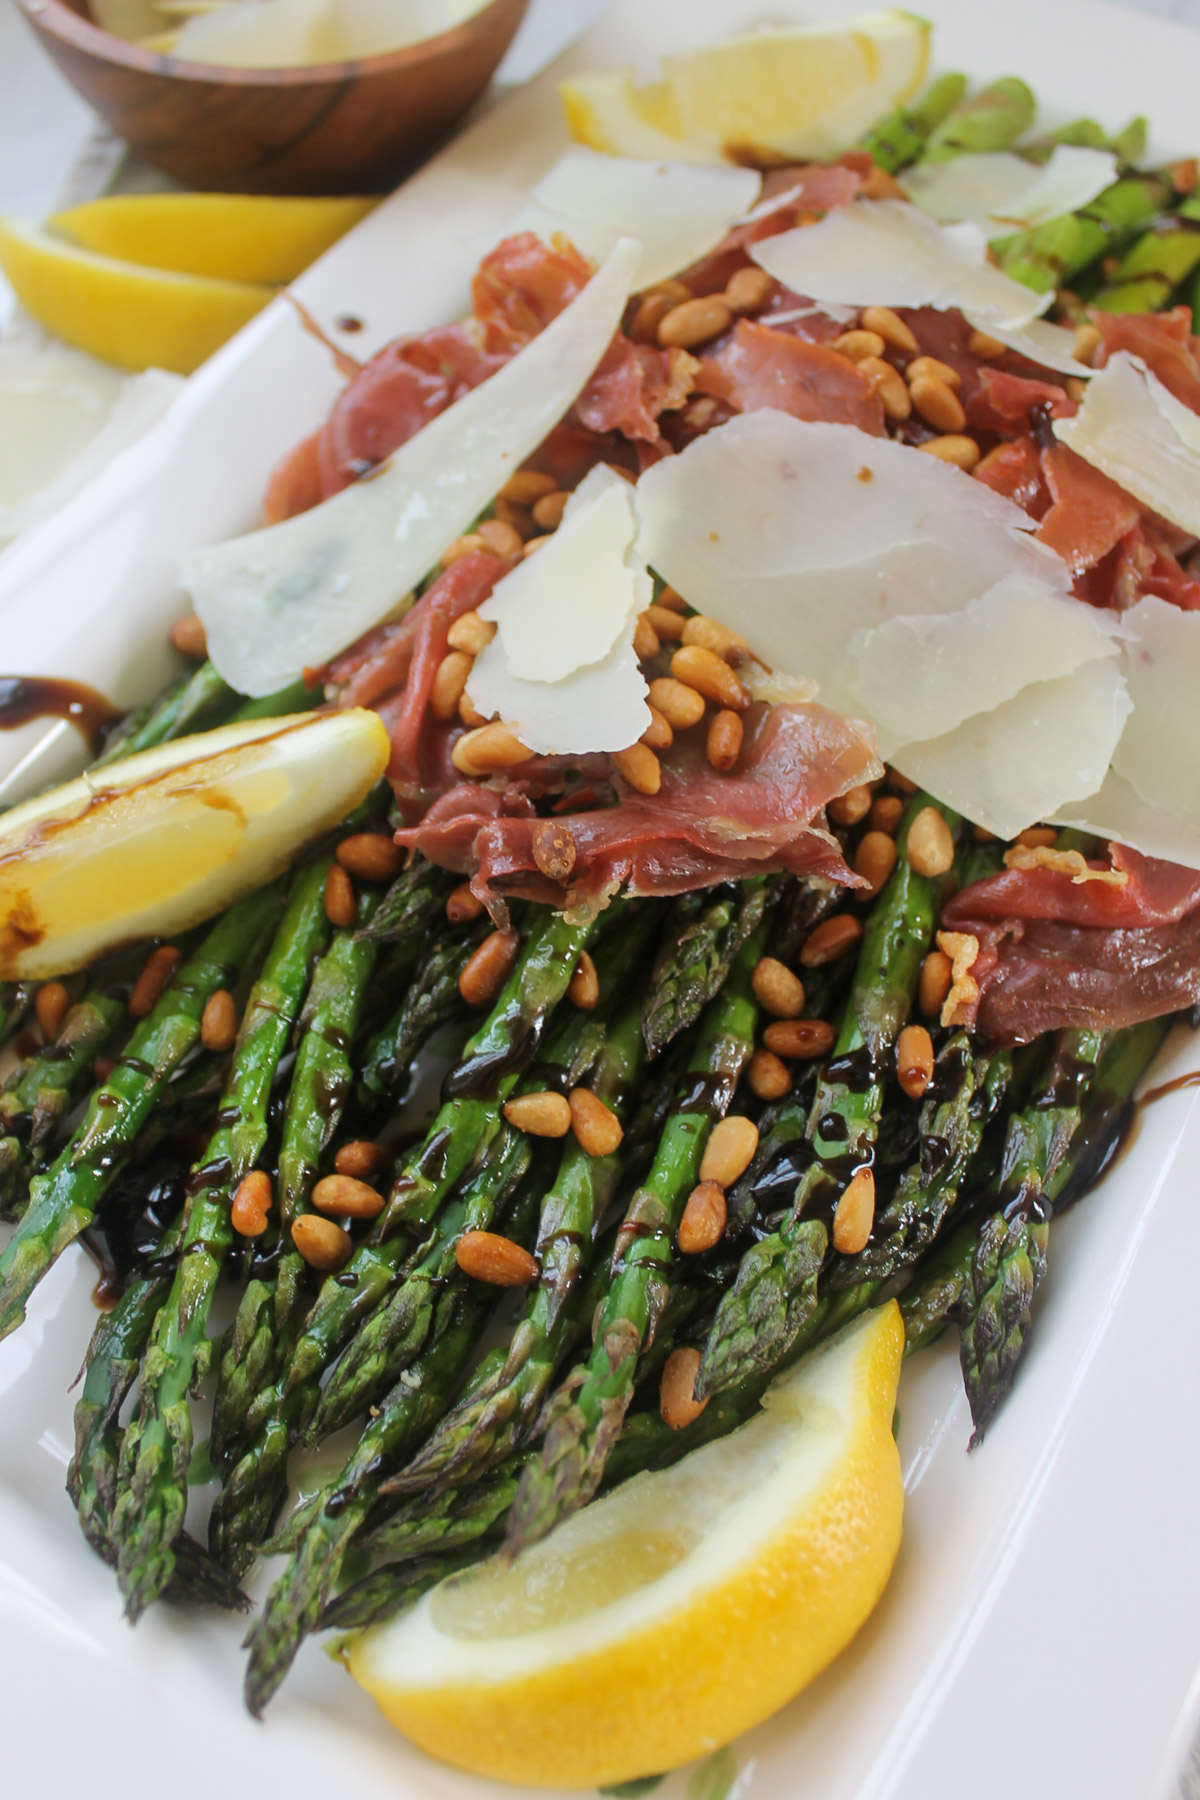 A serving dish of roasted asparagus with crispy prosciutto and big shavings of Parmesan cheese.